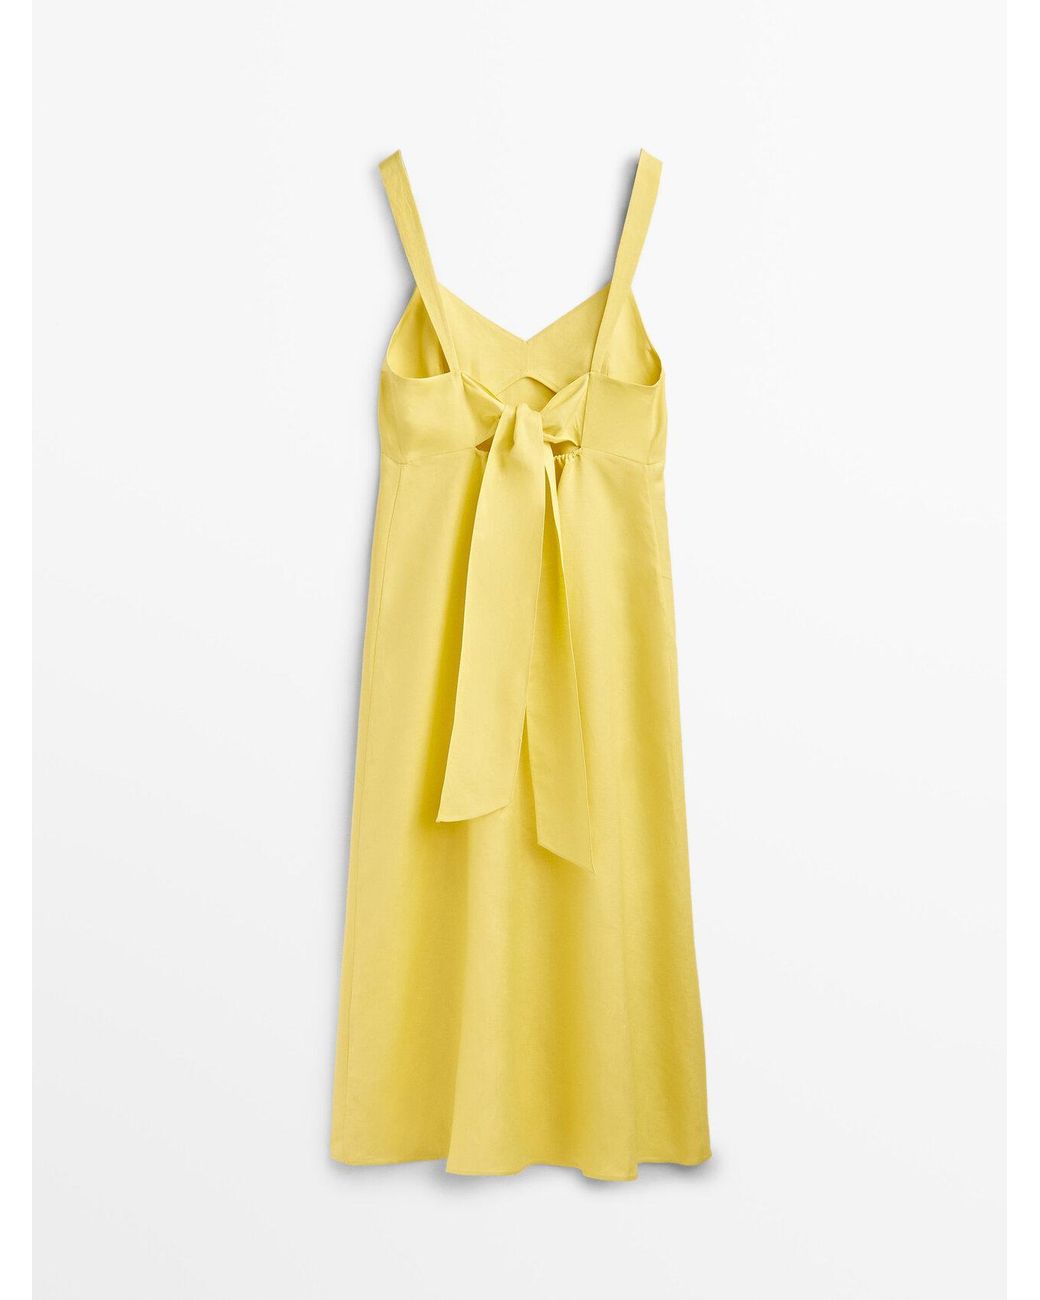 MASSIMO DUTTI Linen Dress With A Tie At The Back in Yellow | Lyst